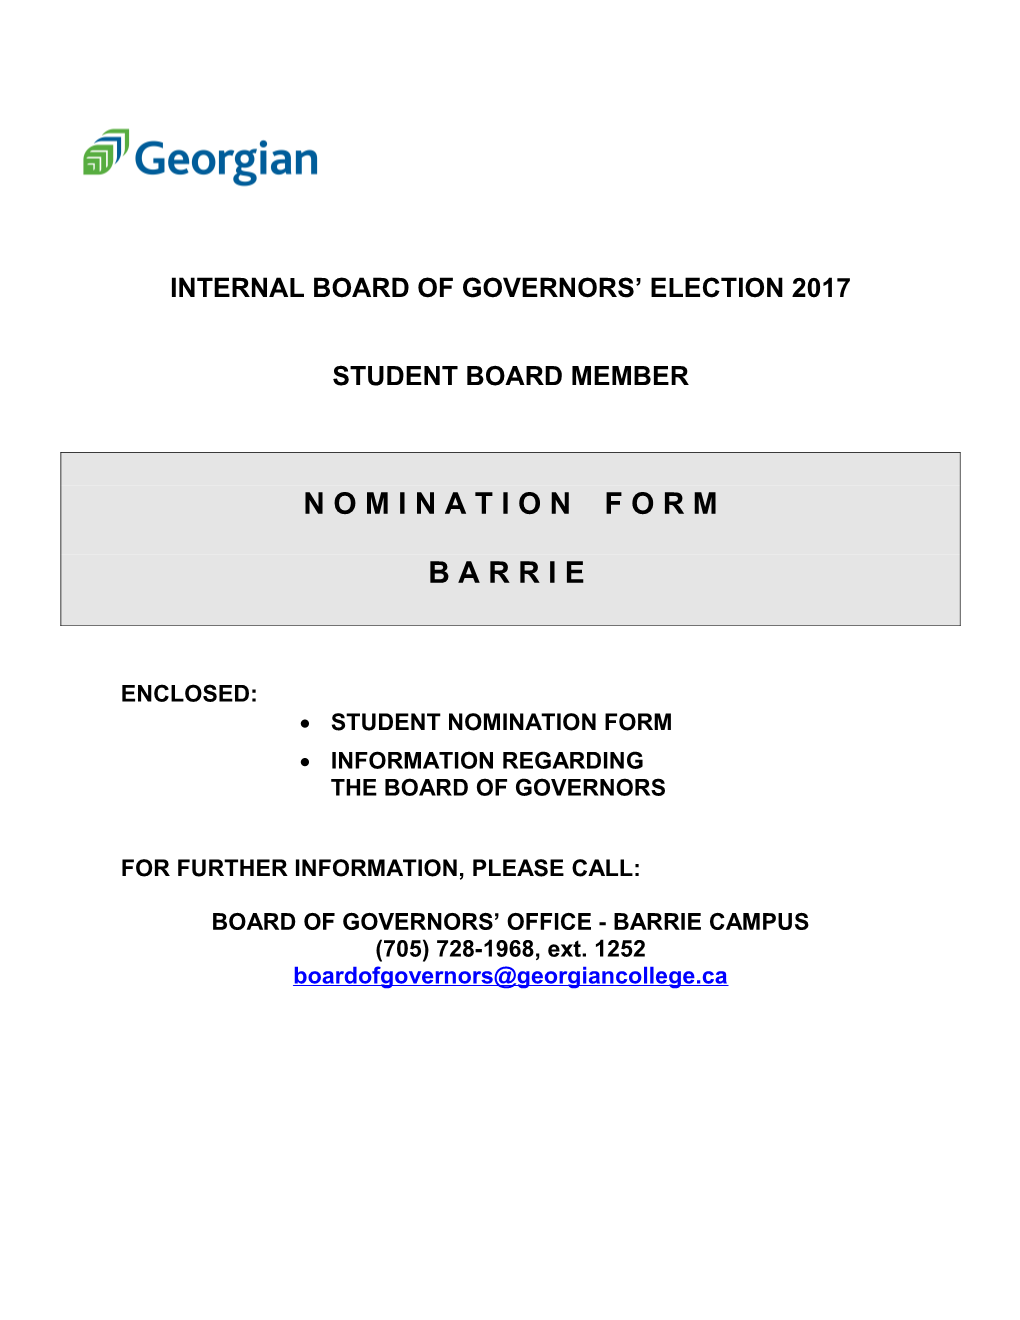 STUDENT BOARD of GOVERNORS REP ELECTION 2017Barrie